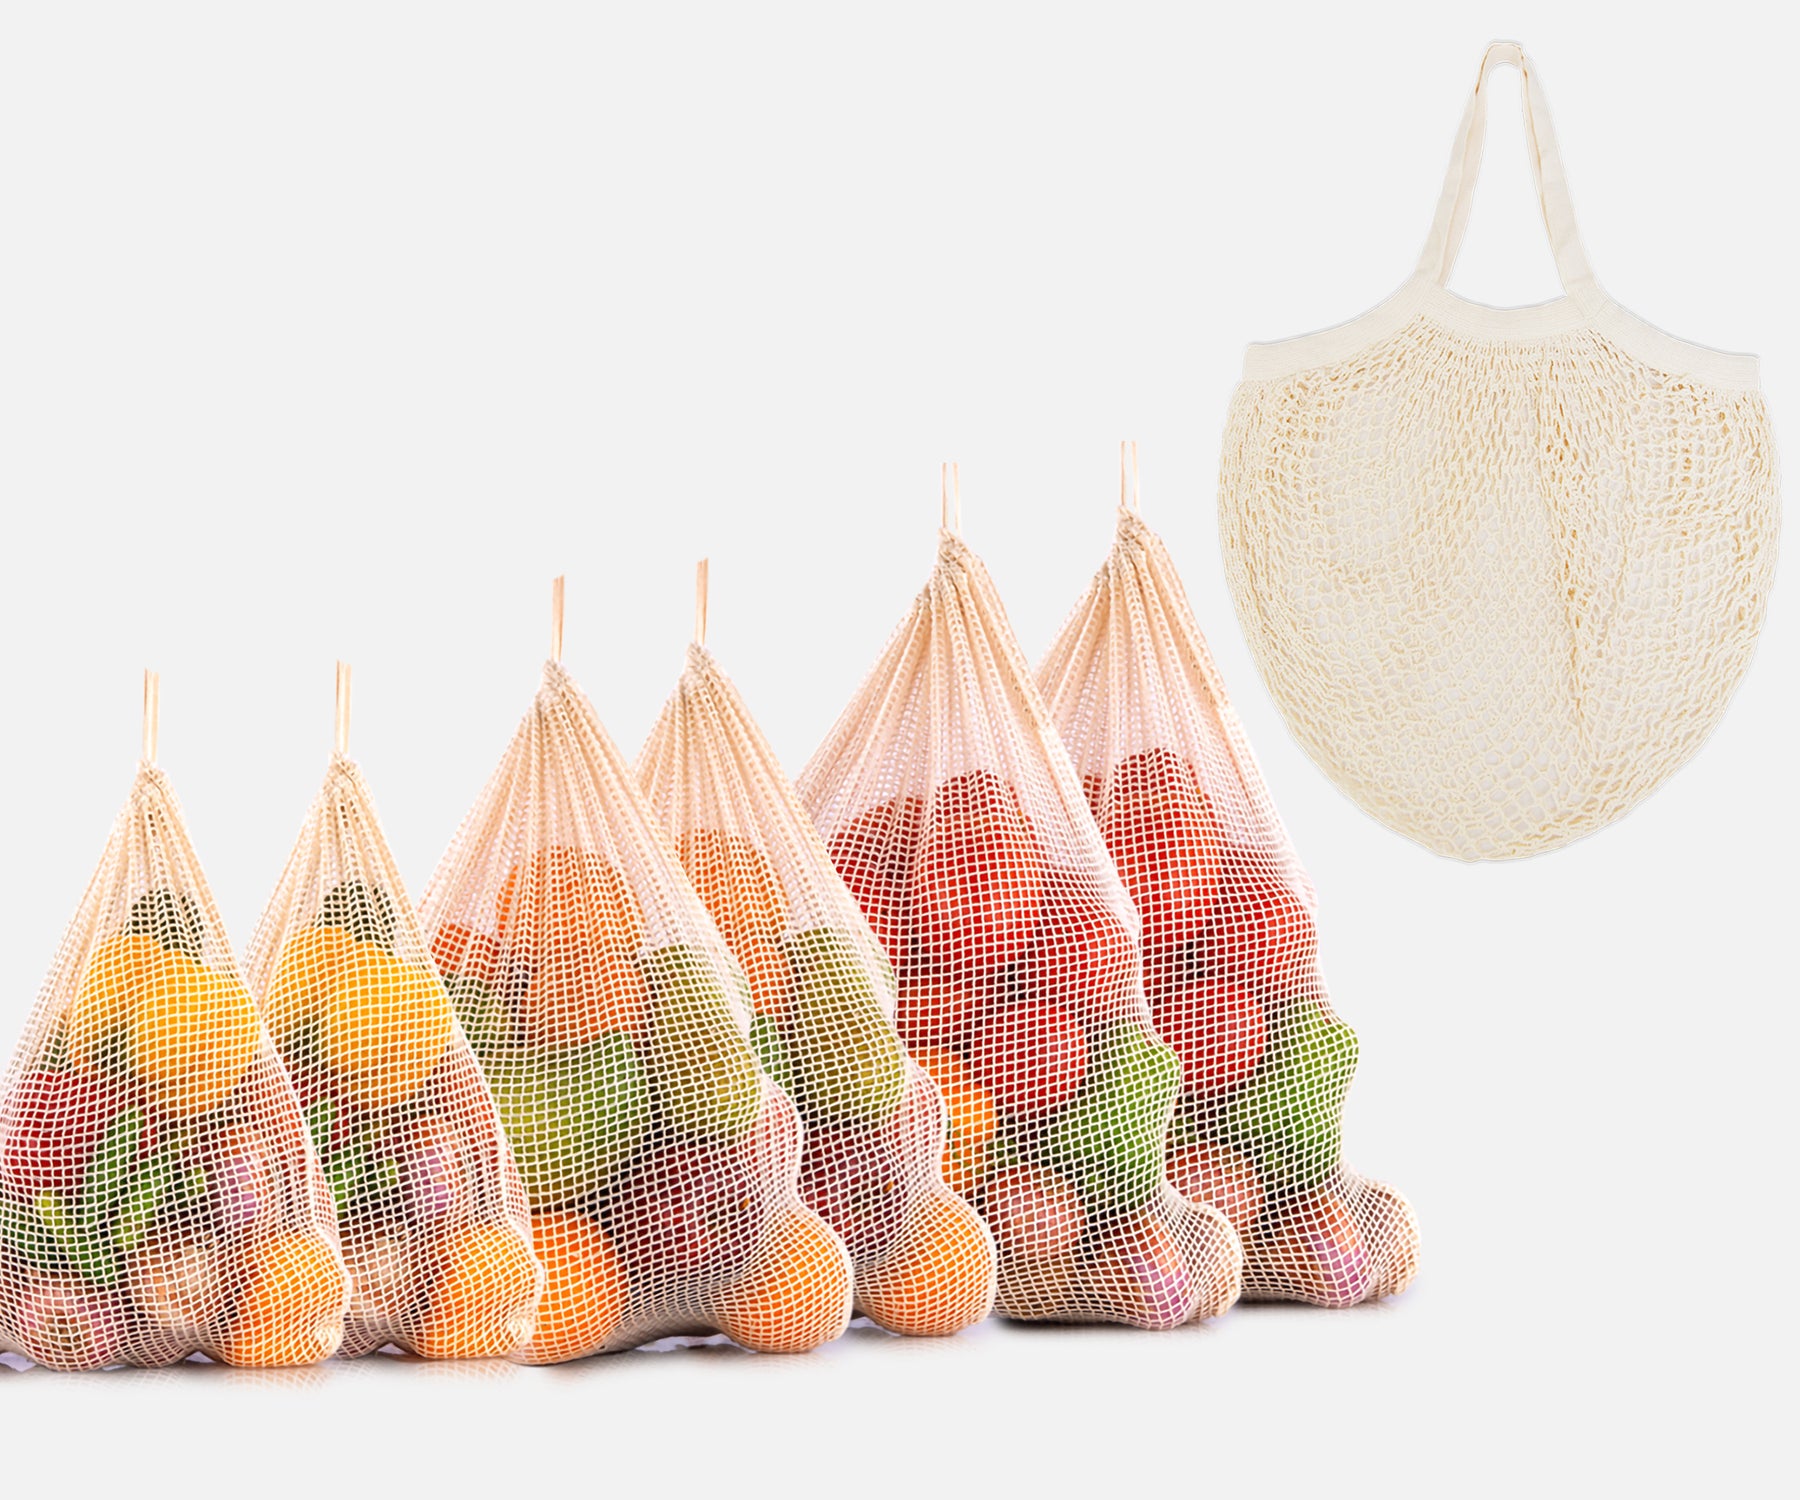 Five string mesh bags each containing different fruits and vegetables